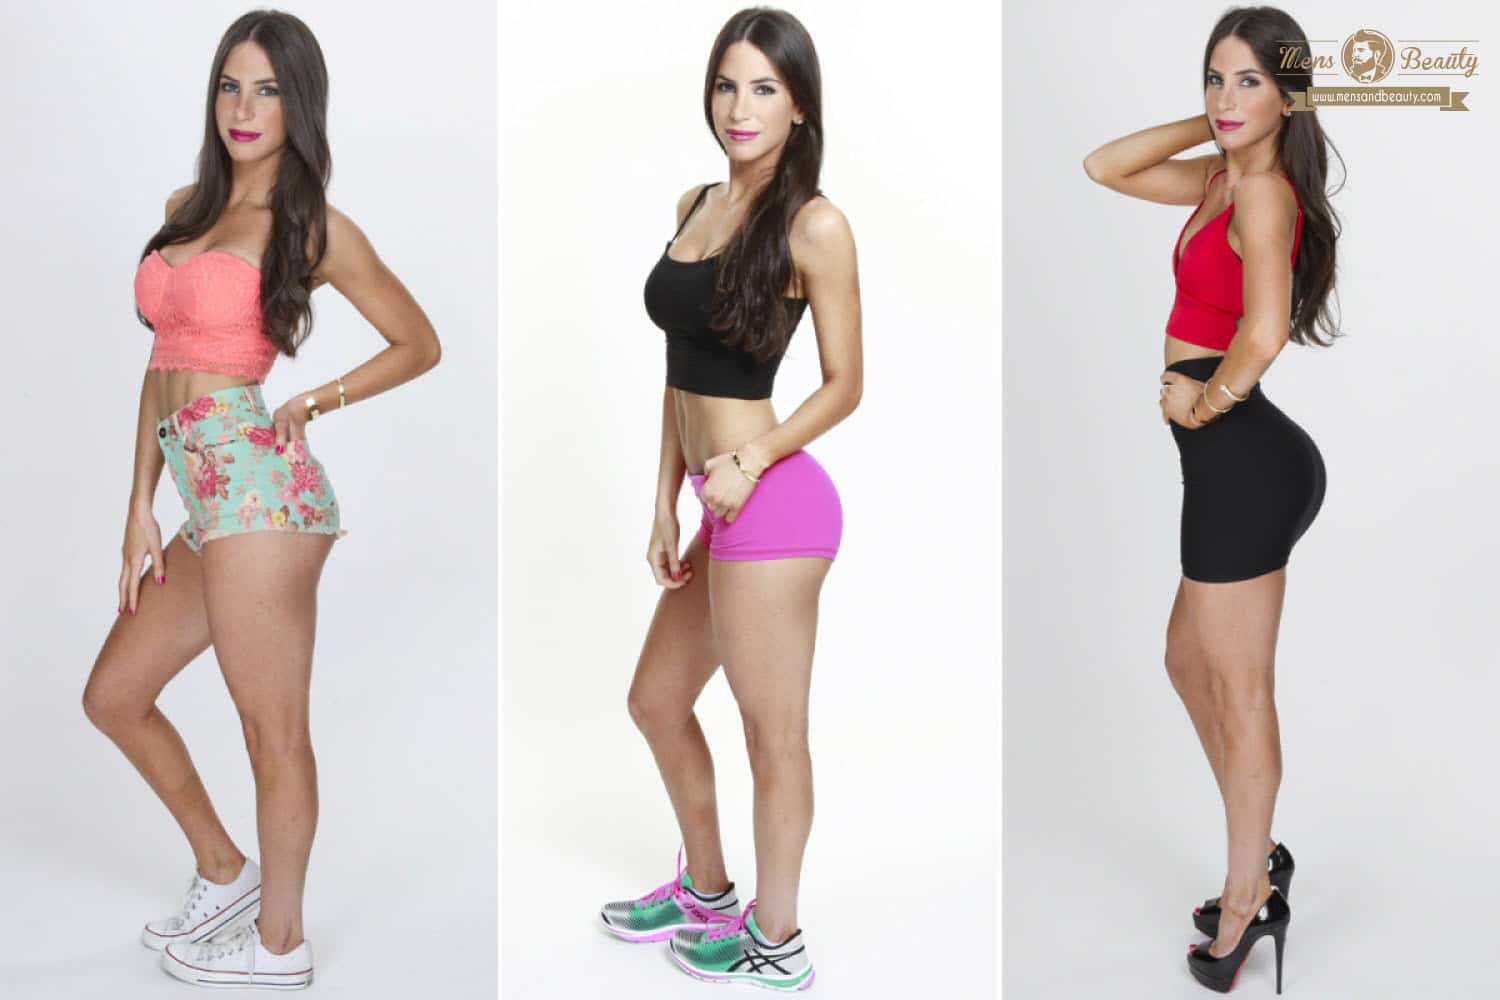 chicas sexys mejores traseros de mujeres jen selter